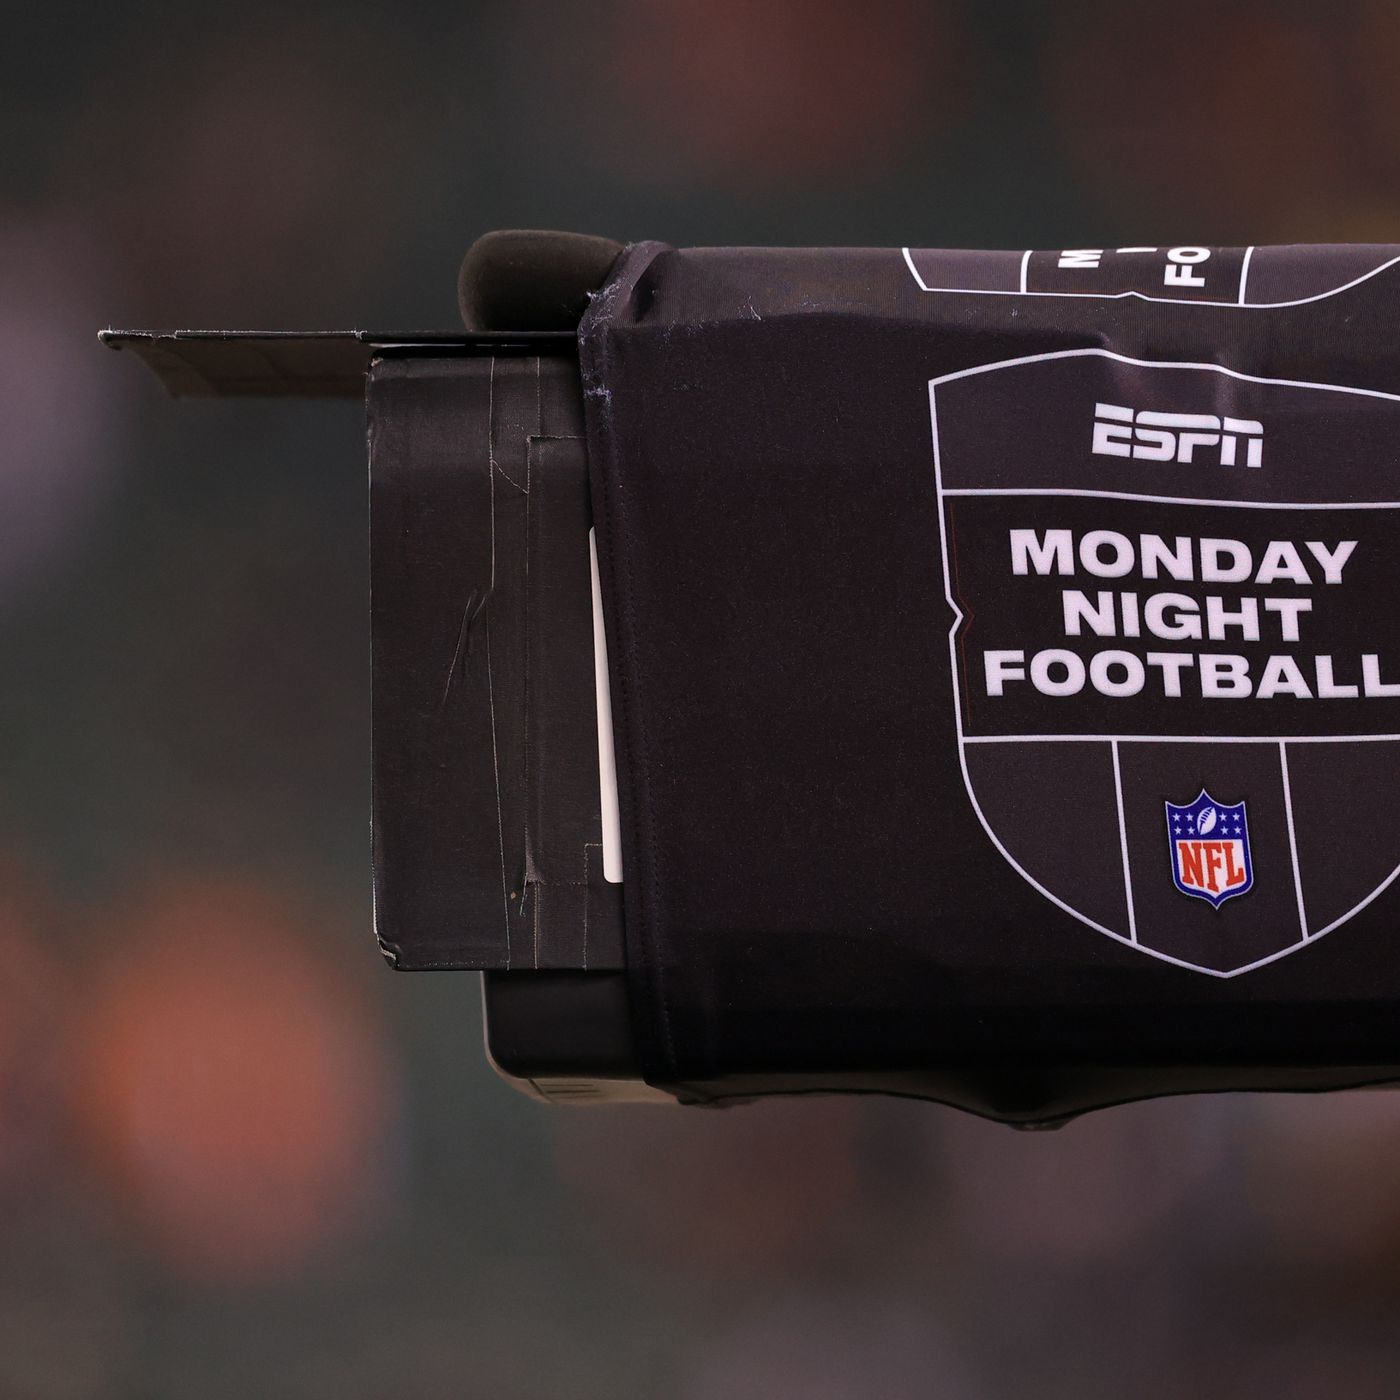 NFL Schedule 2022: Full list of Monday Night Football games